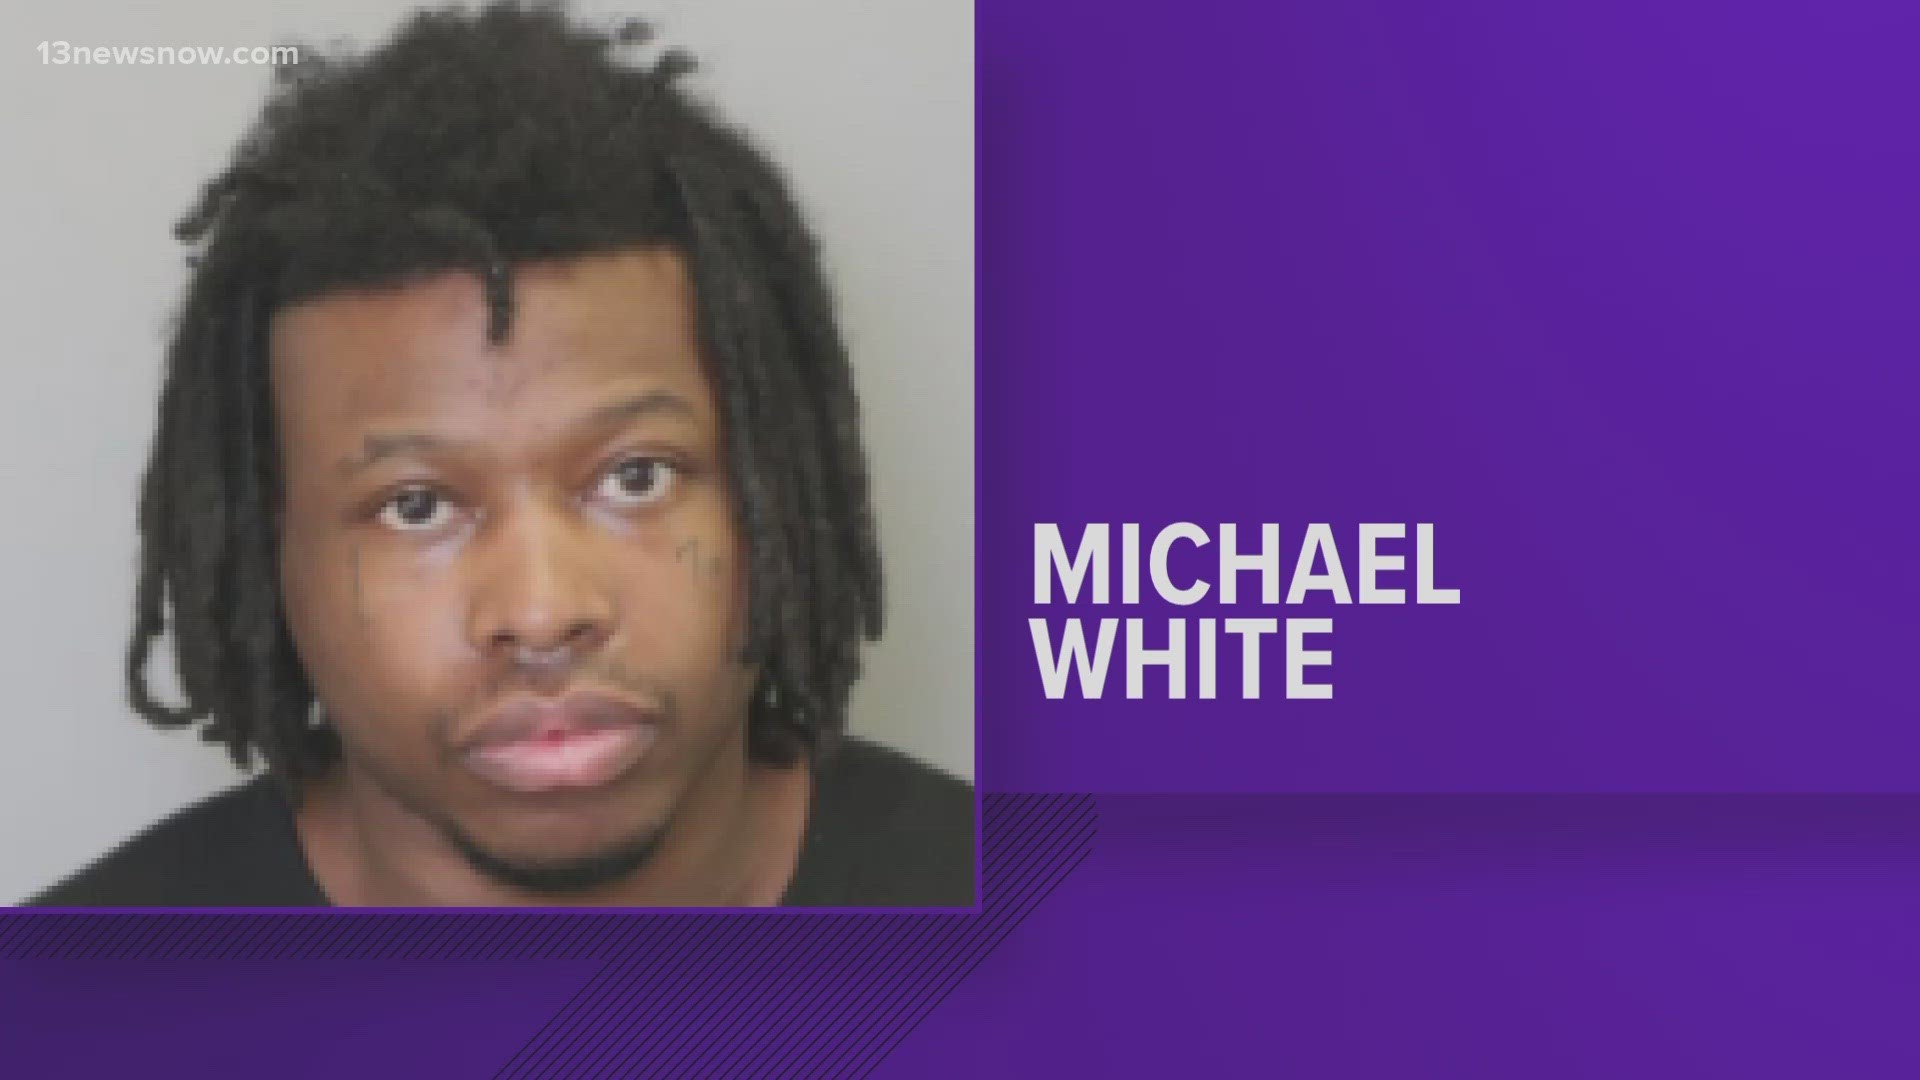 Michael White admitted to first-degree murder, robbery, and firearm charges. He was arrested in a 2021 shooting at a Harris Teeter gas station.